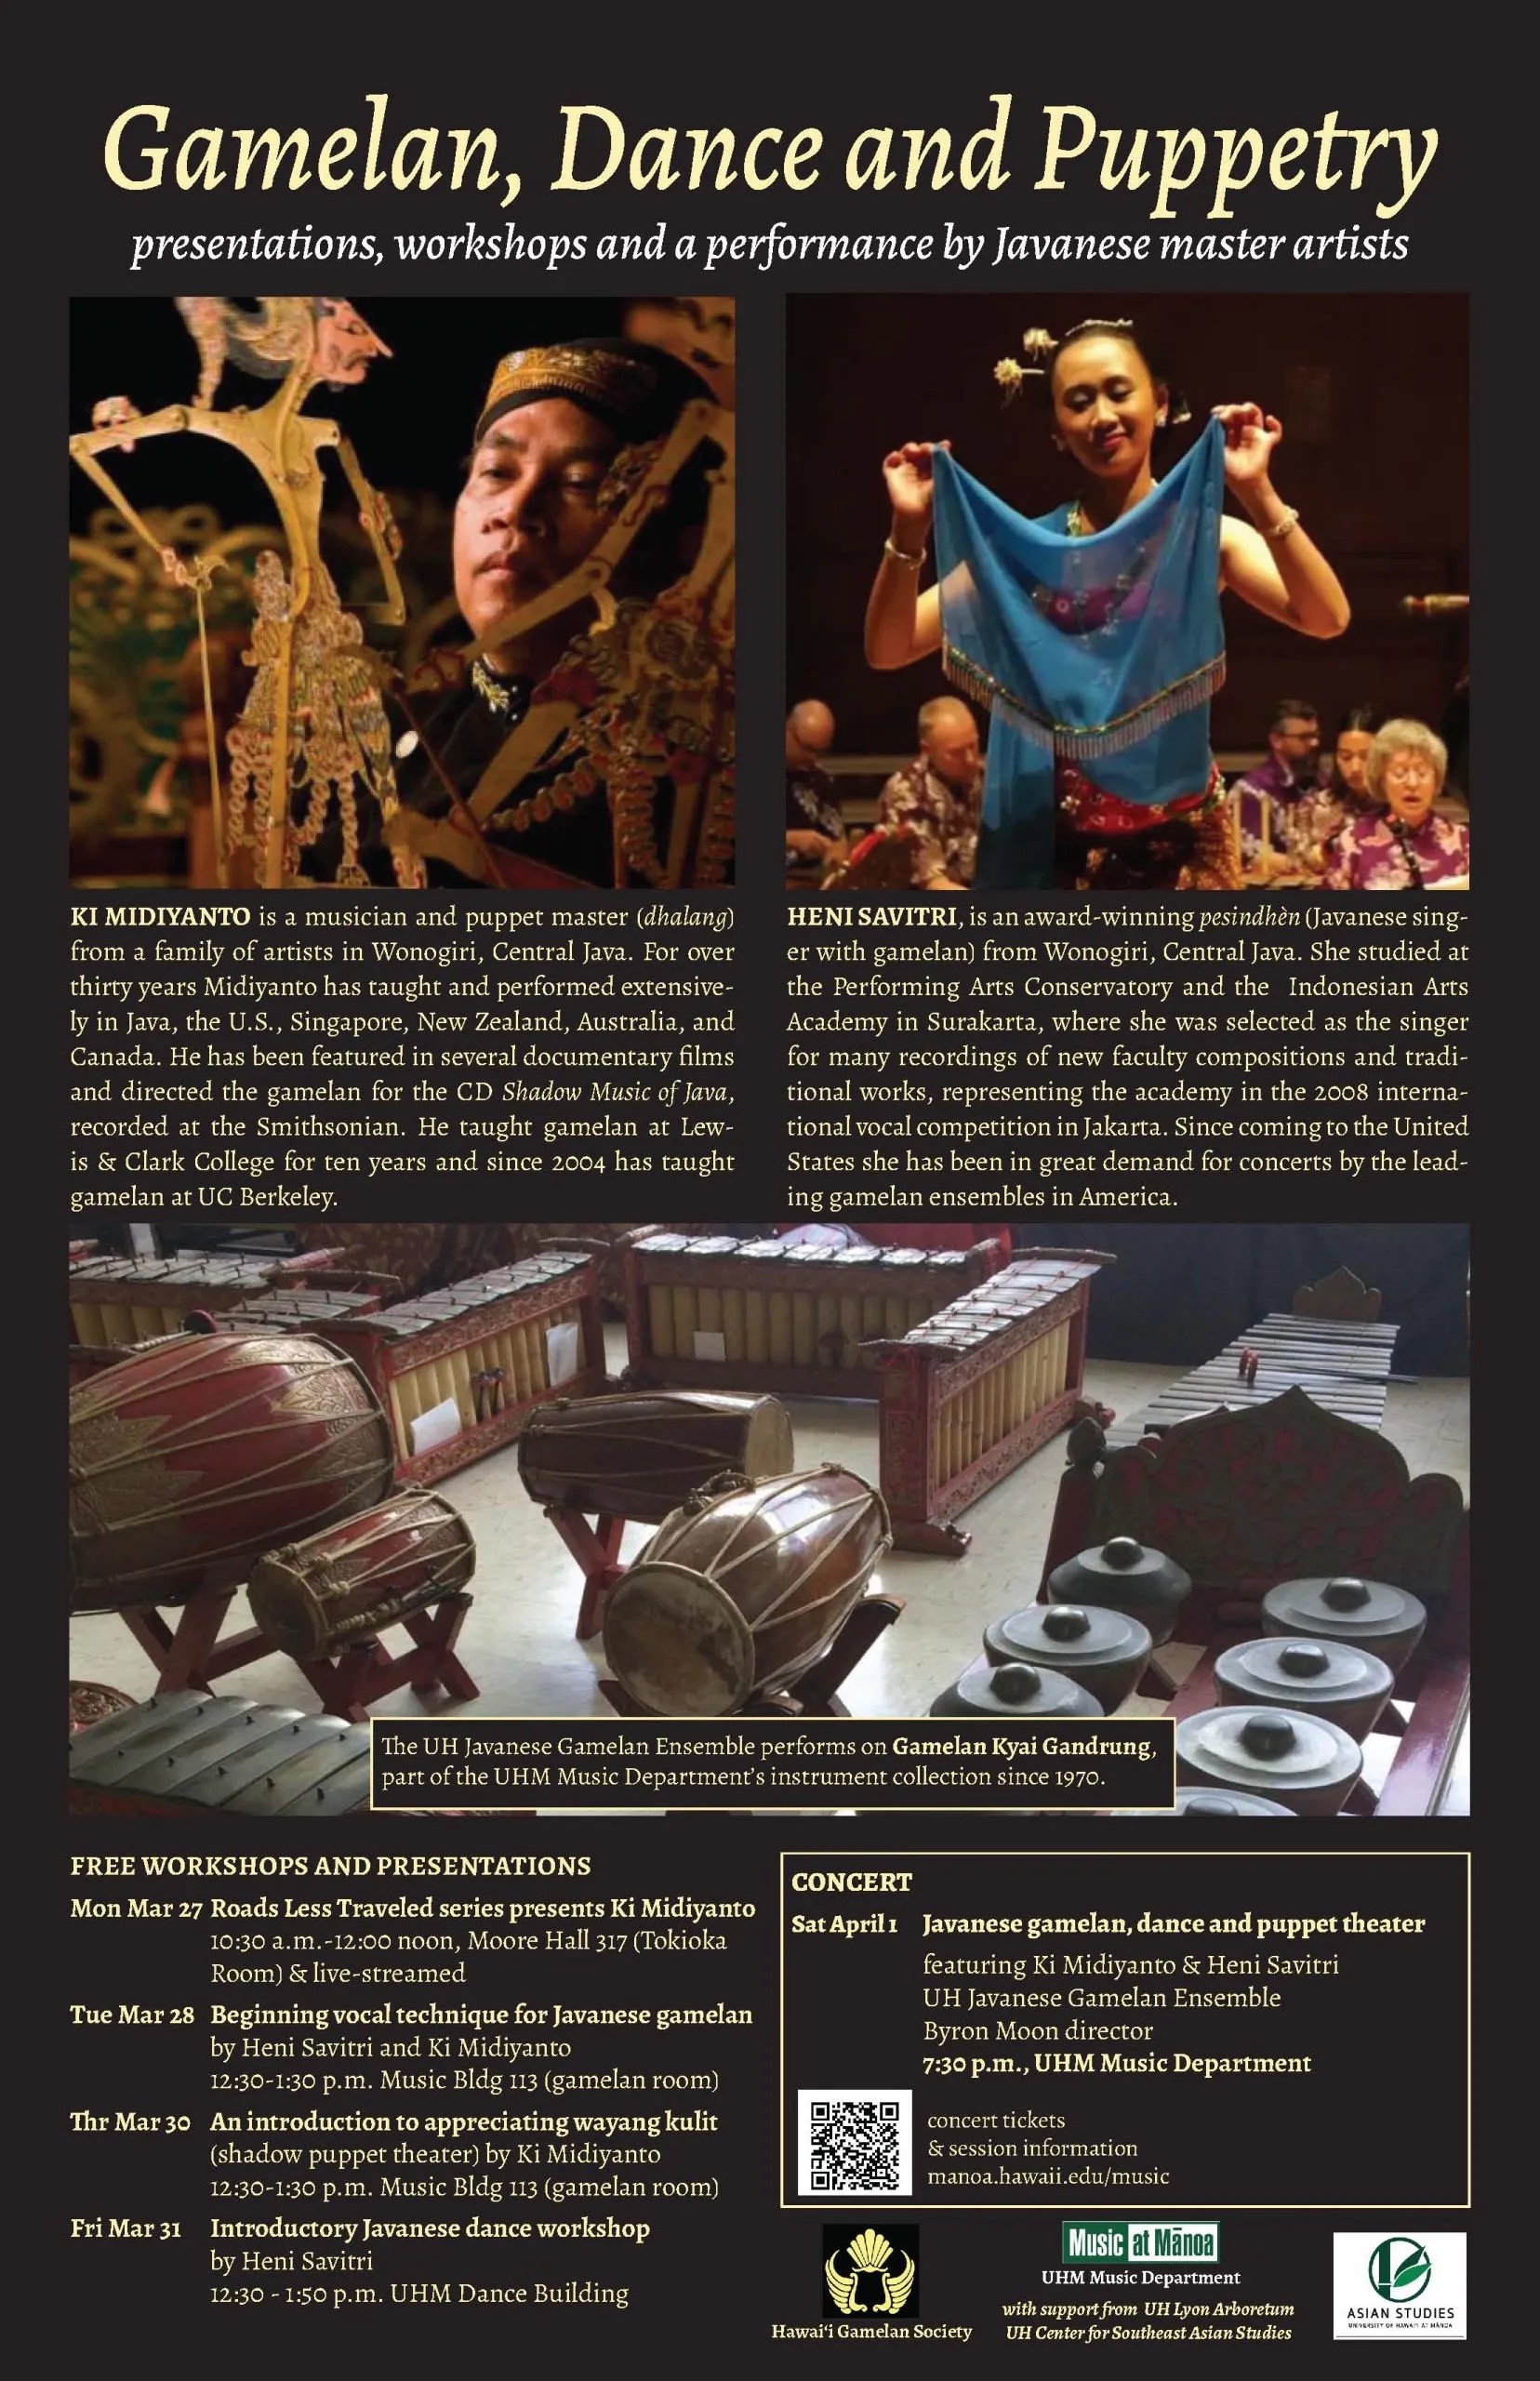 Flyer for Gamelan, Dance and Puppetry Event.